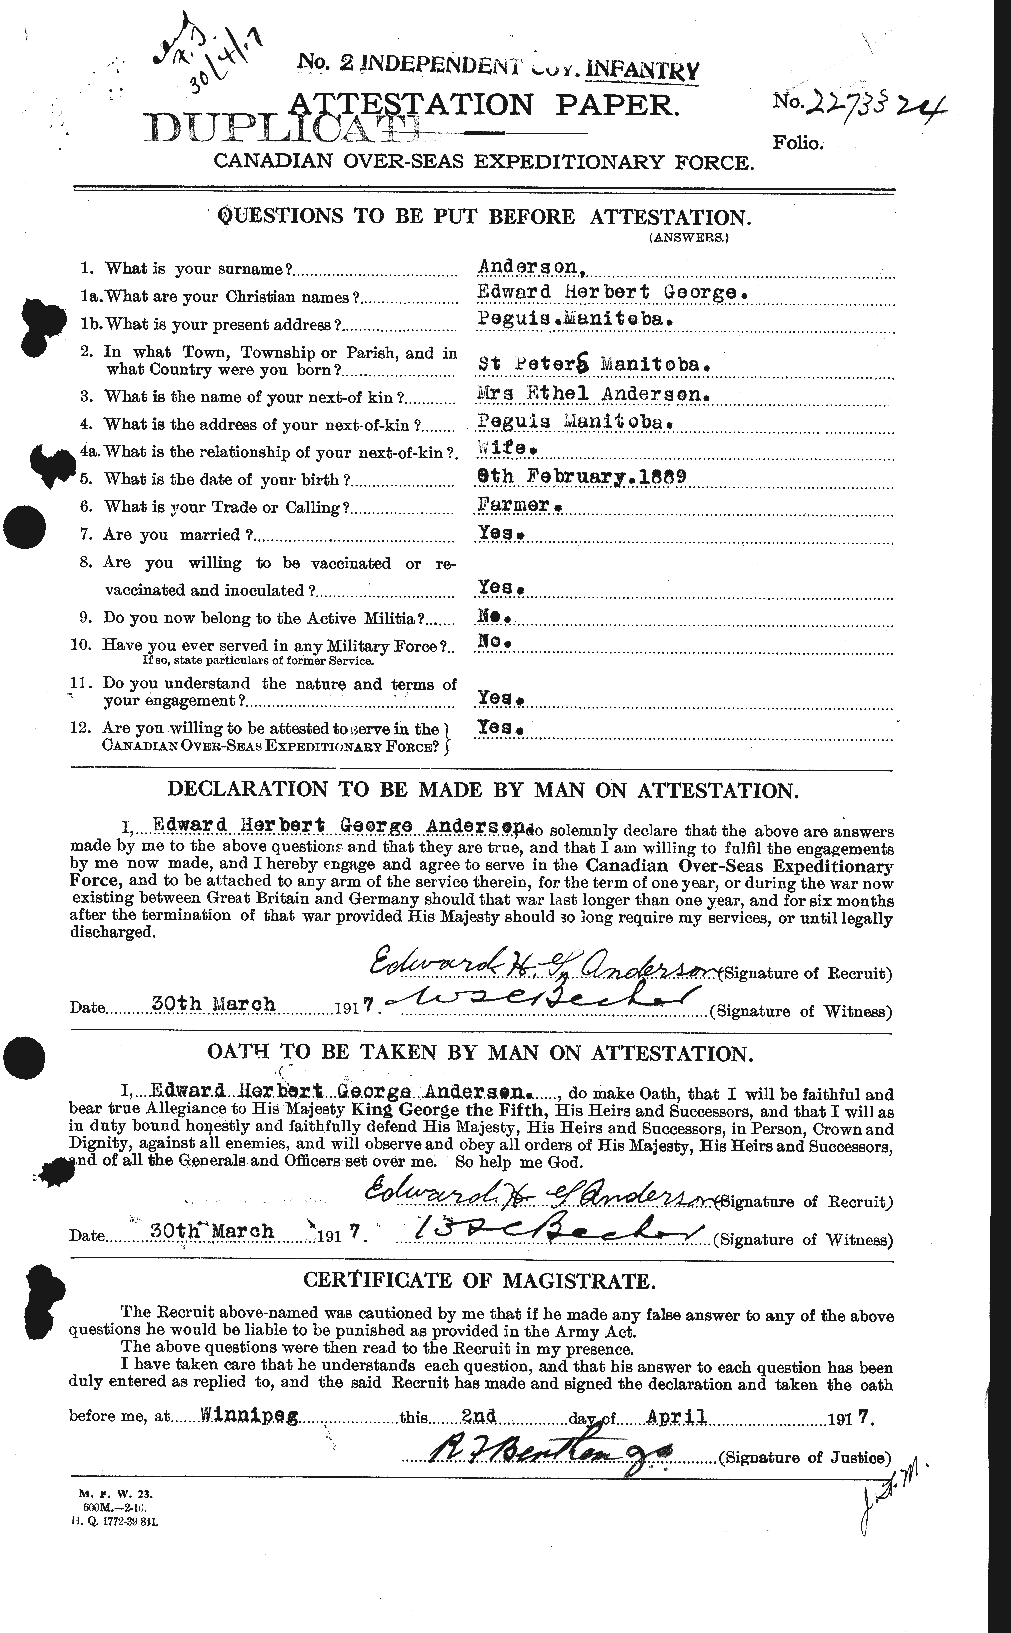 Personnel Records of the First World War - CEF 209933a